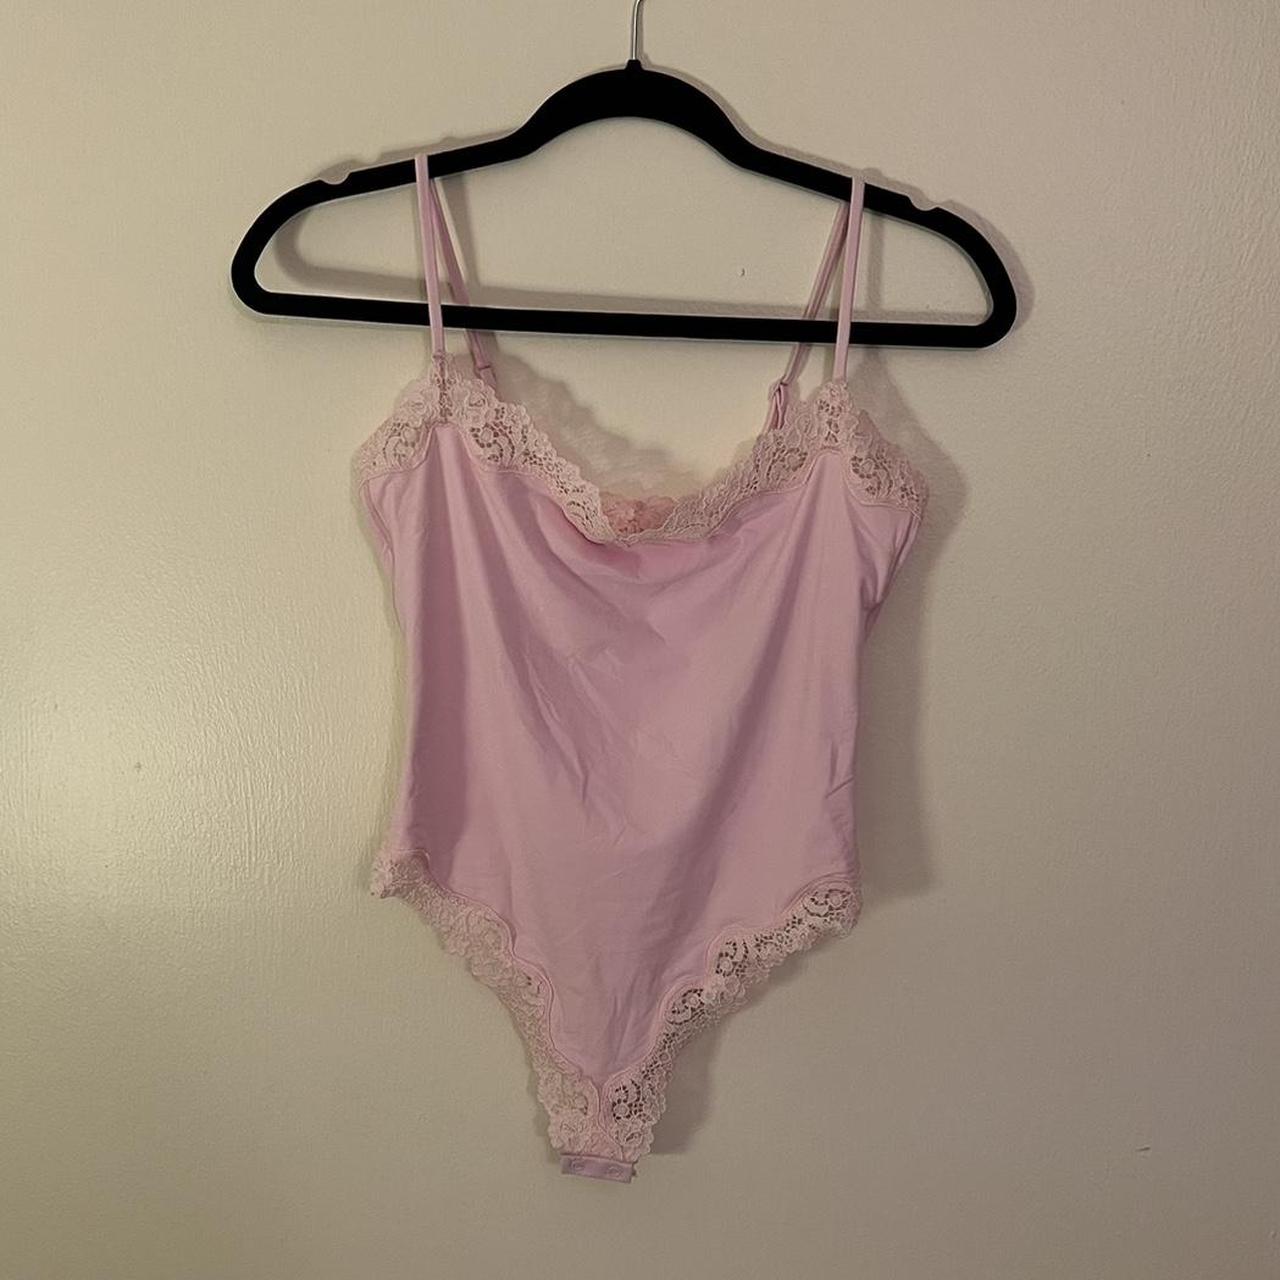 SKIMS FITS EVERYBODY LACE CAMI BODYSUIT Pink Size M - $90 New With Tags -  From Ashley